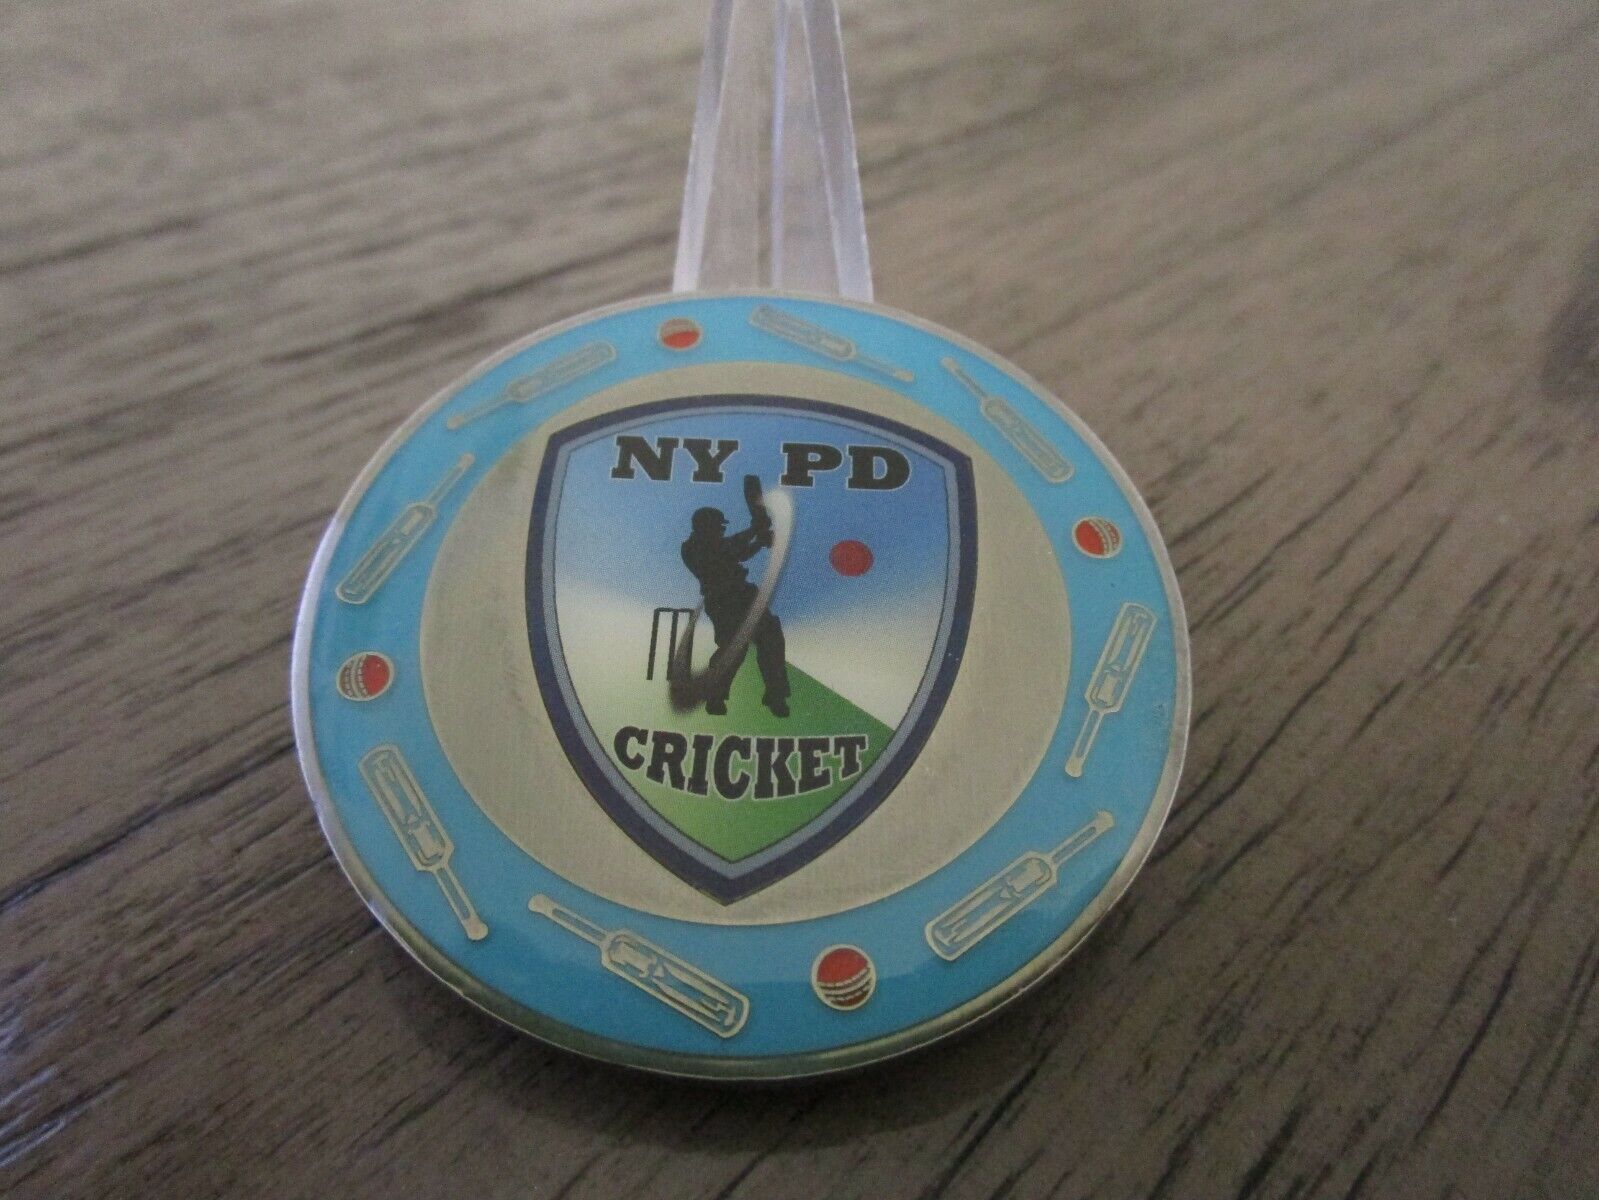 NYPD New York Police Department Cricket Team Challenge Coin #298C